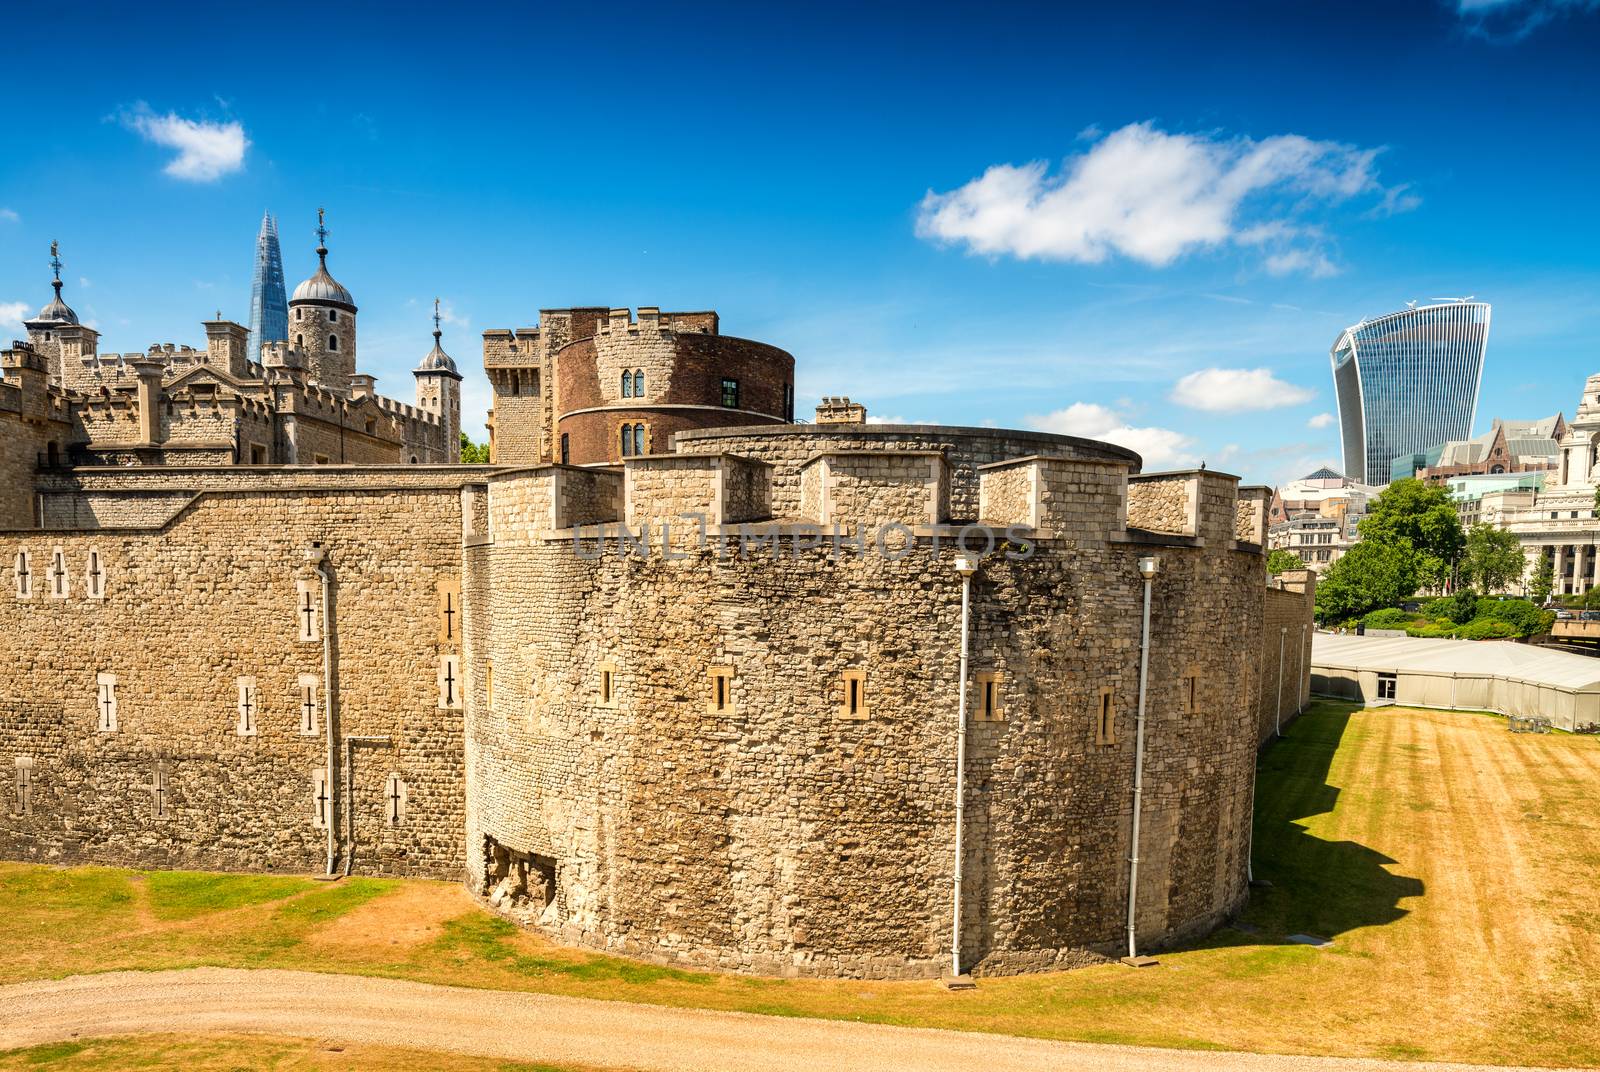 Tower of London ancient complex with City on background by jovannig